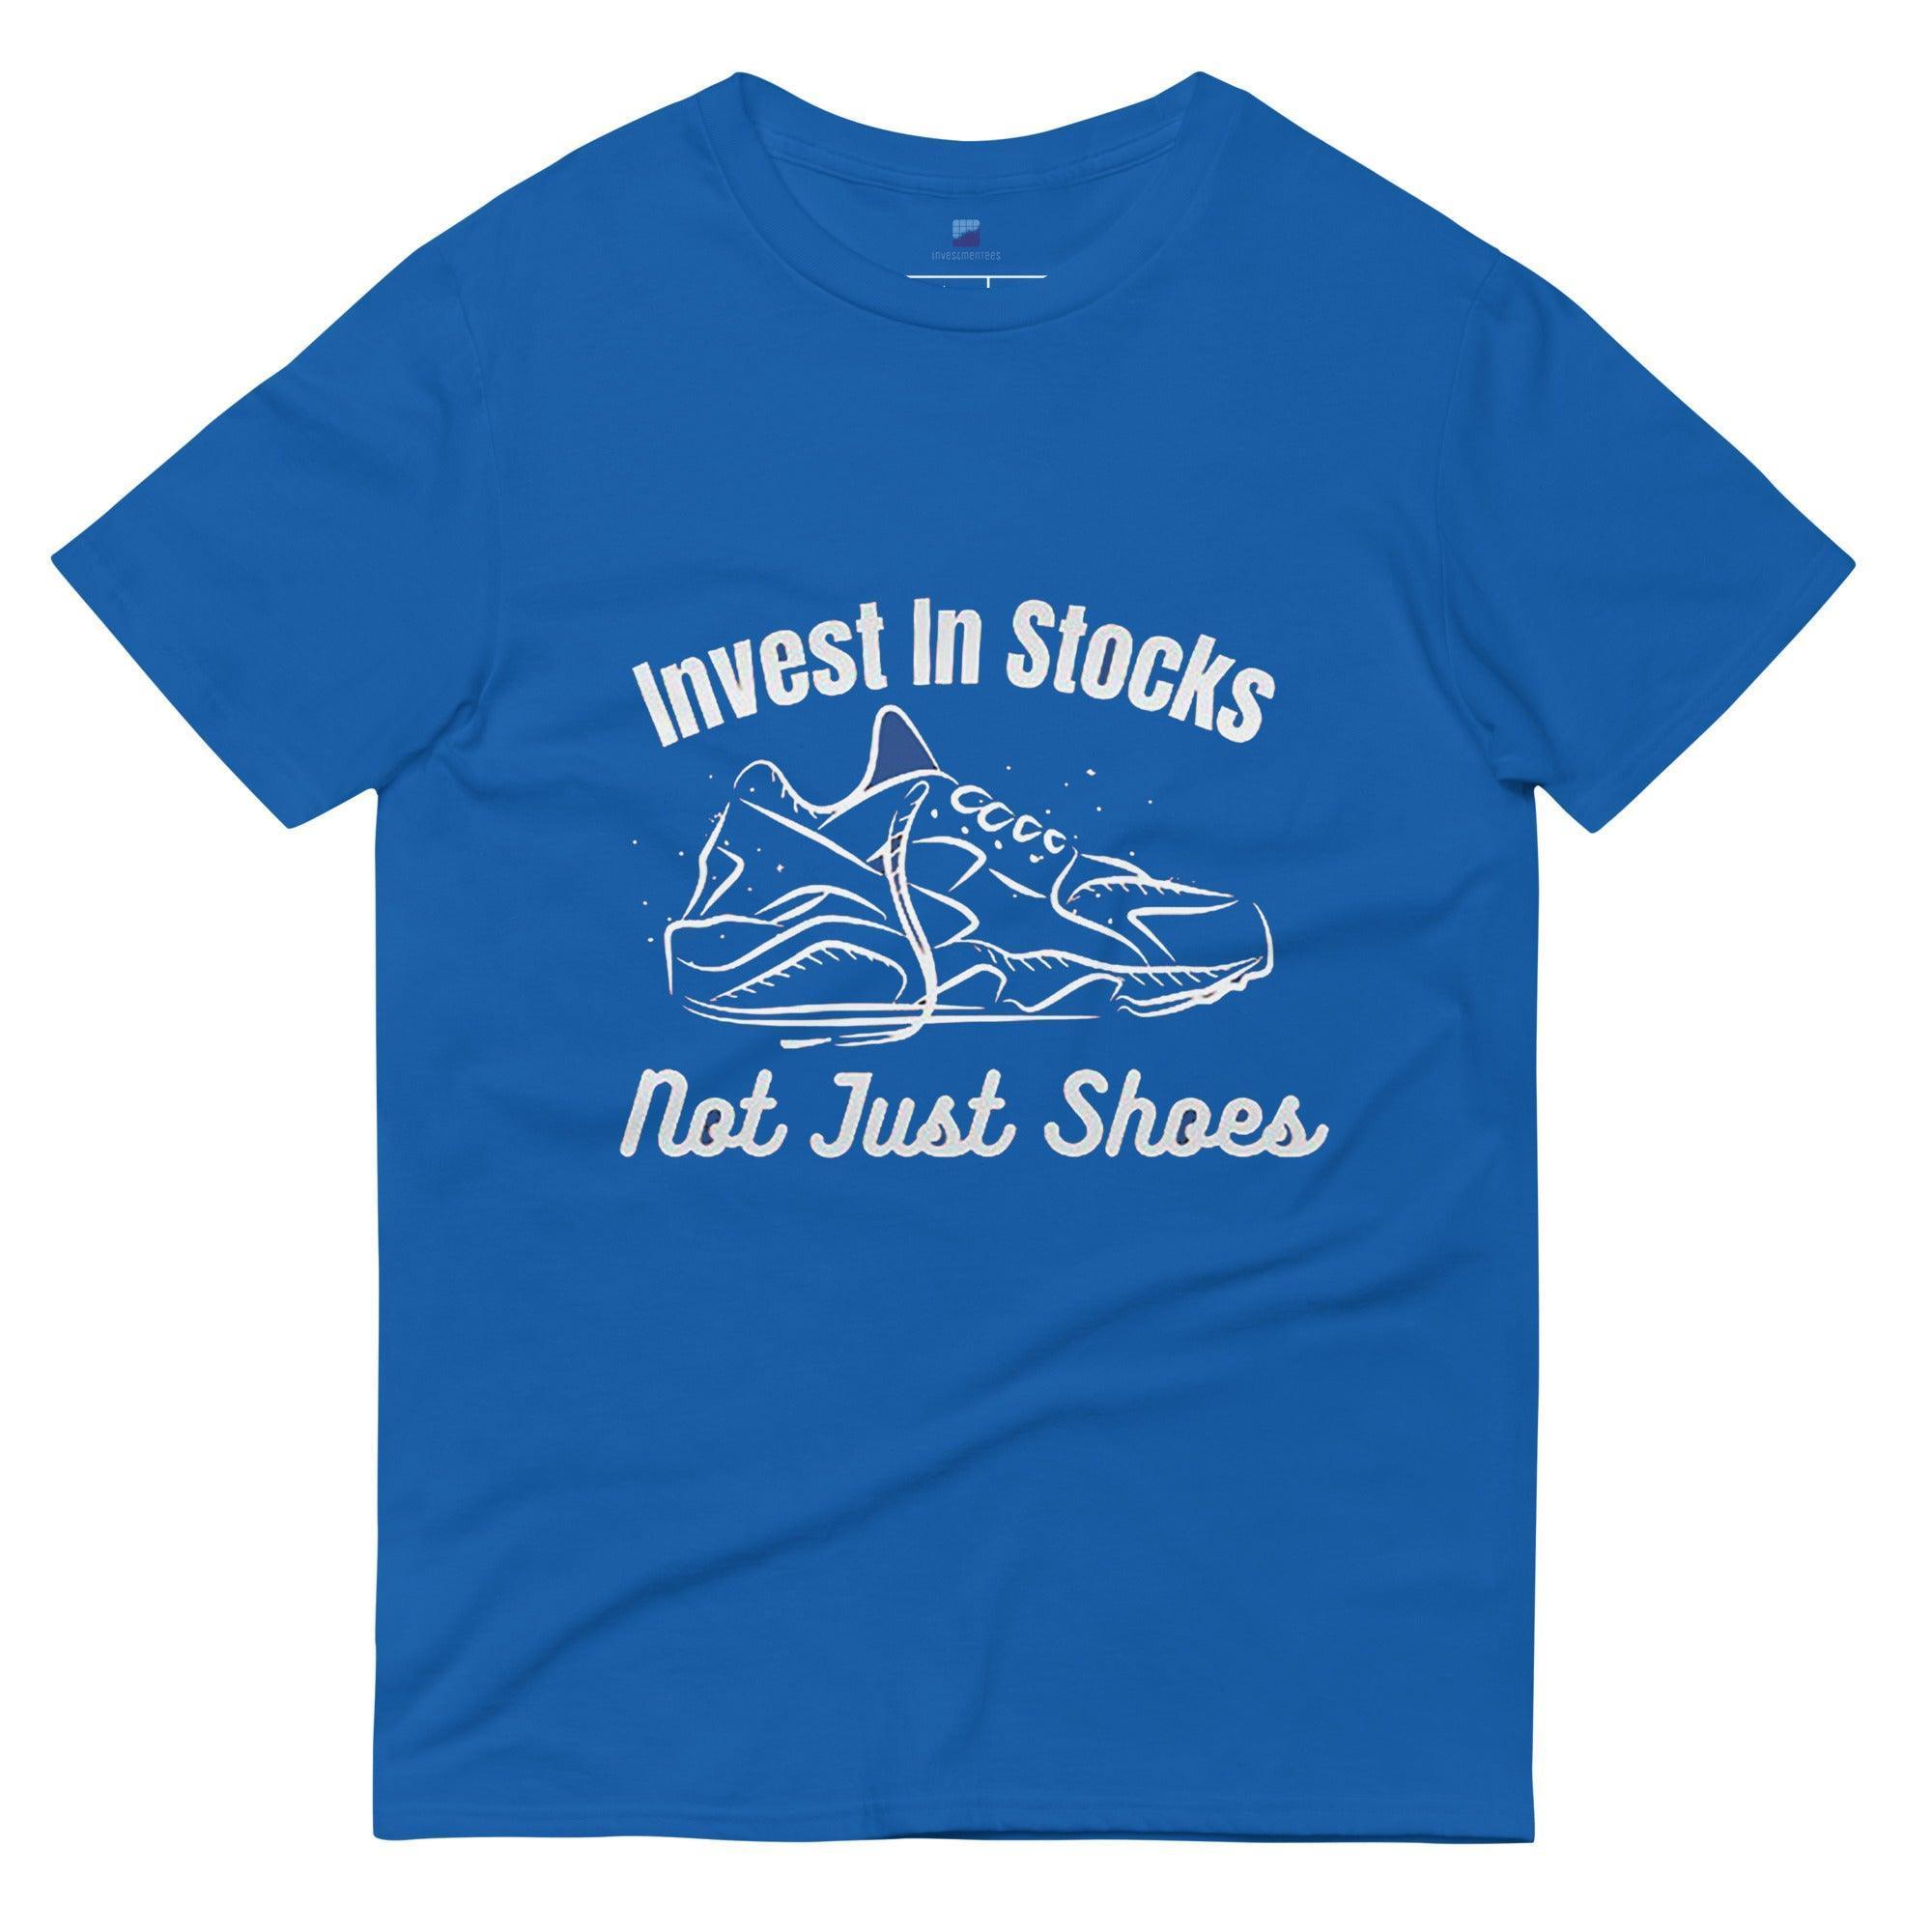 Invest In Stocks Not Just Shoes T-Shirt - InvestmenTees